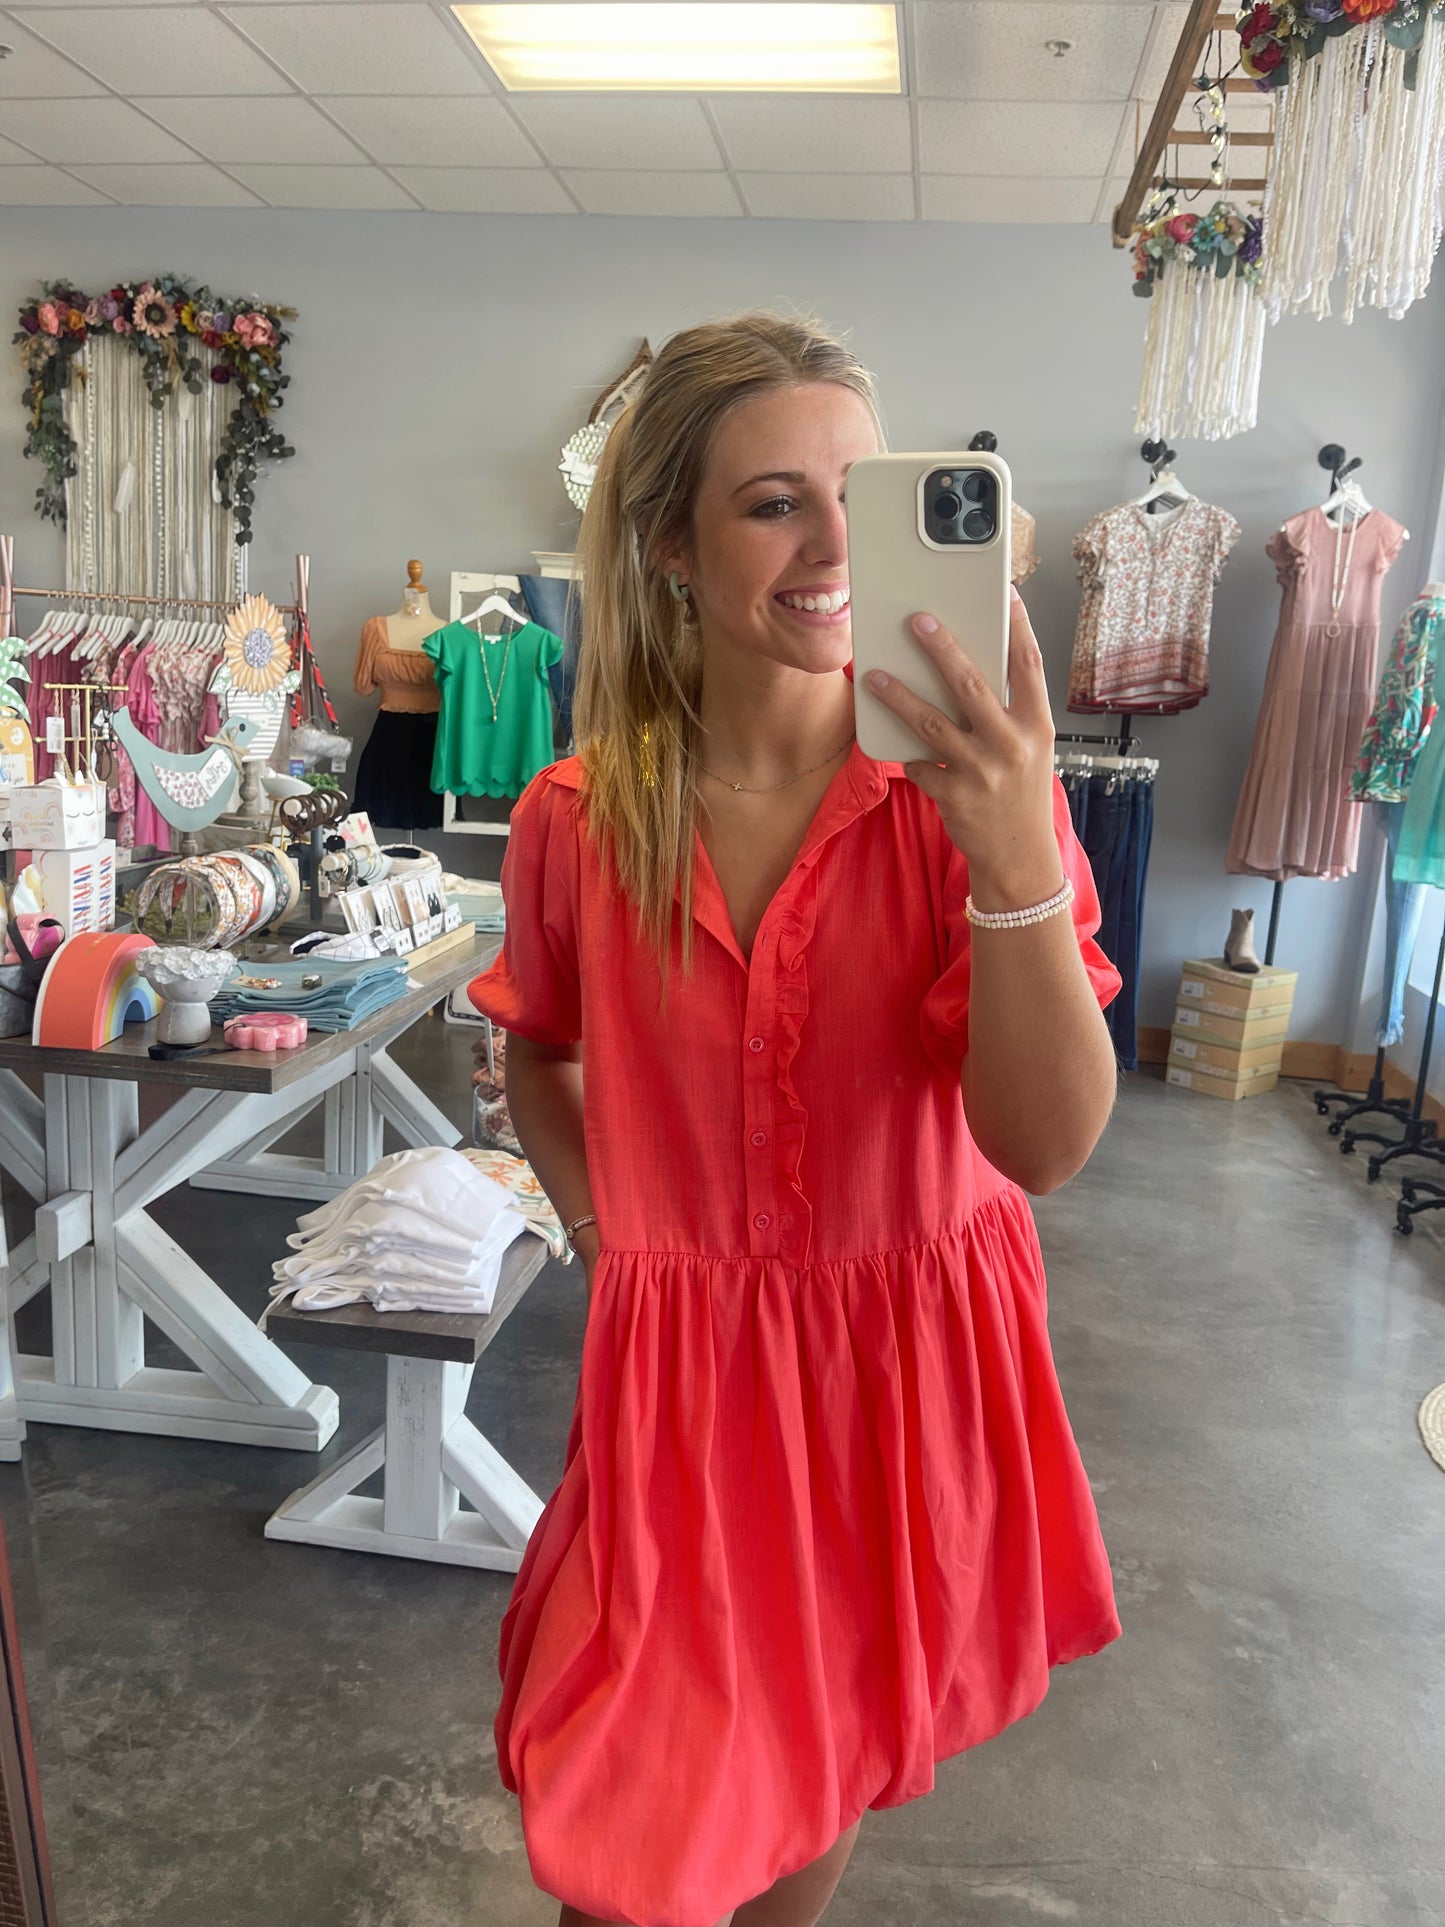 The Carlee Coral Bubble Dress (S-L)